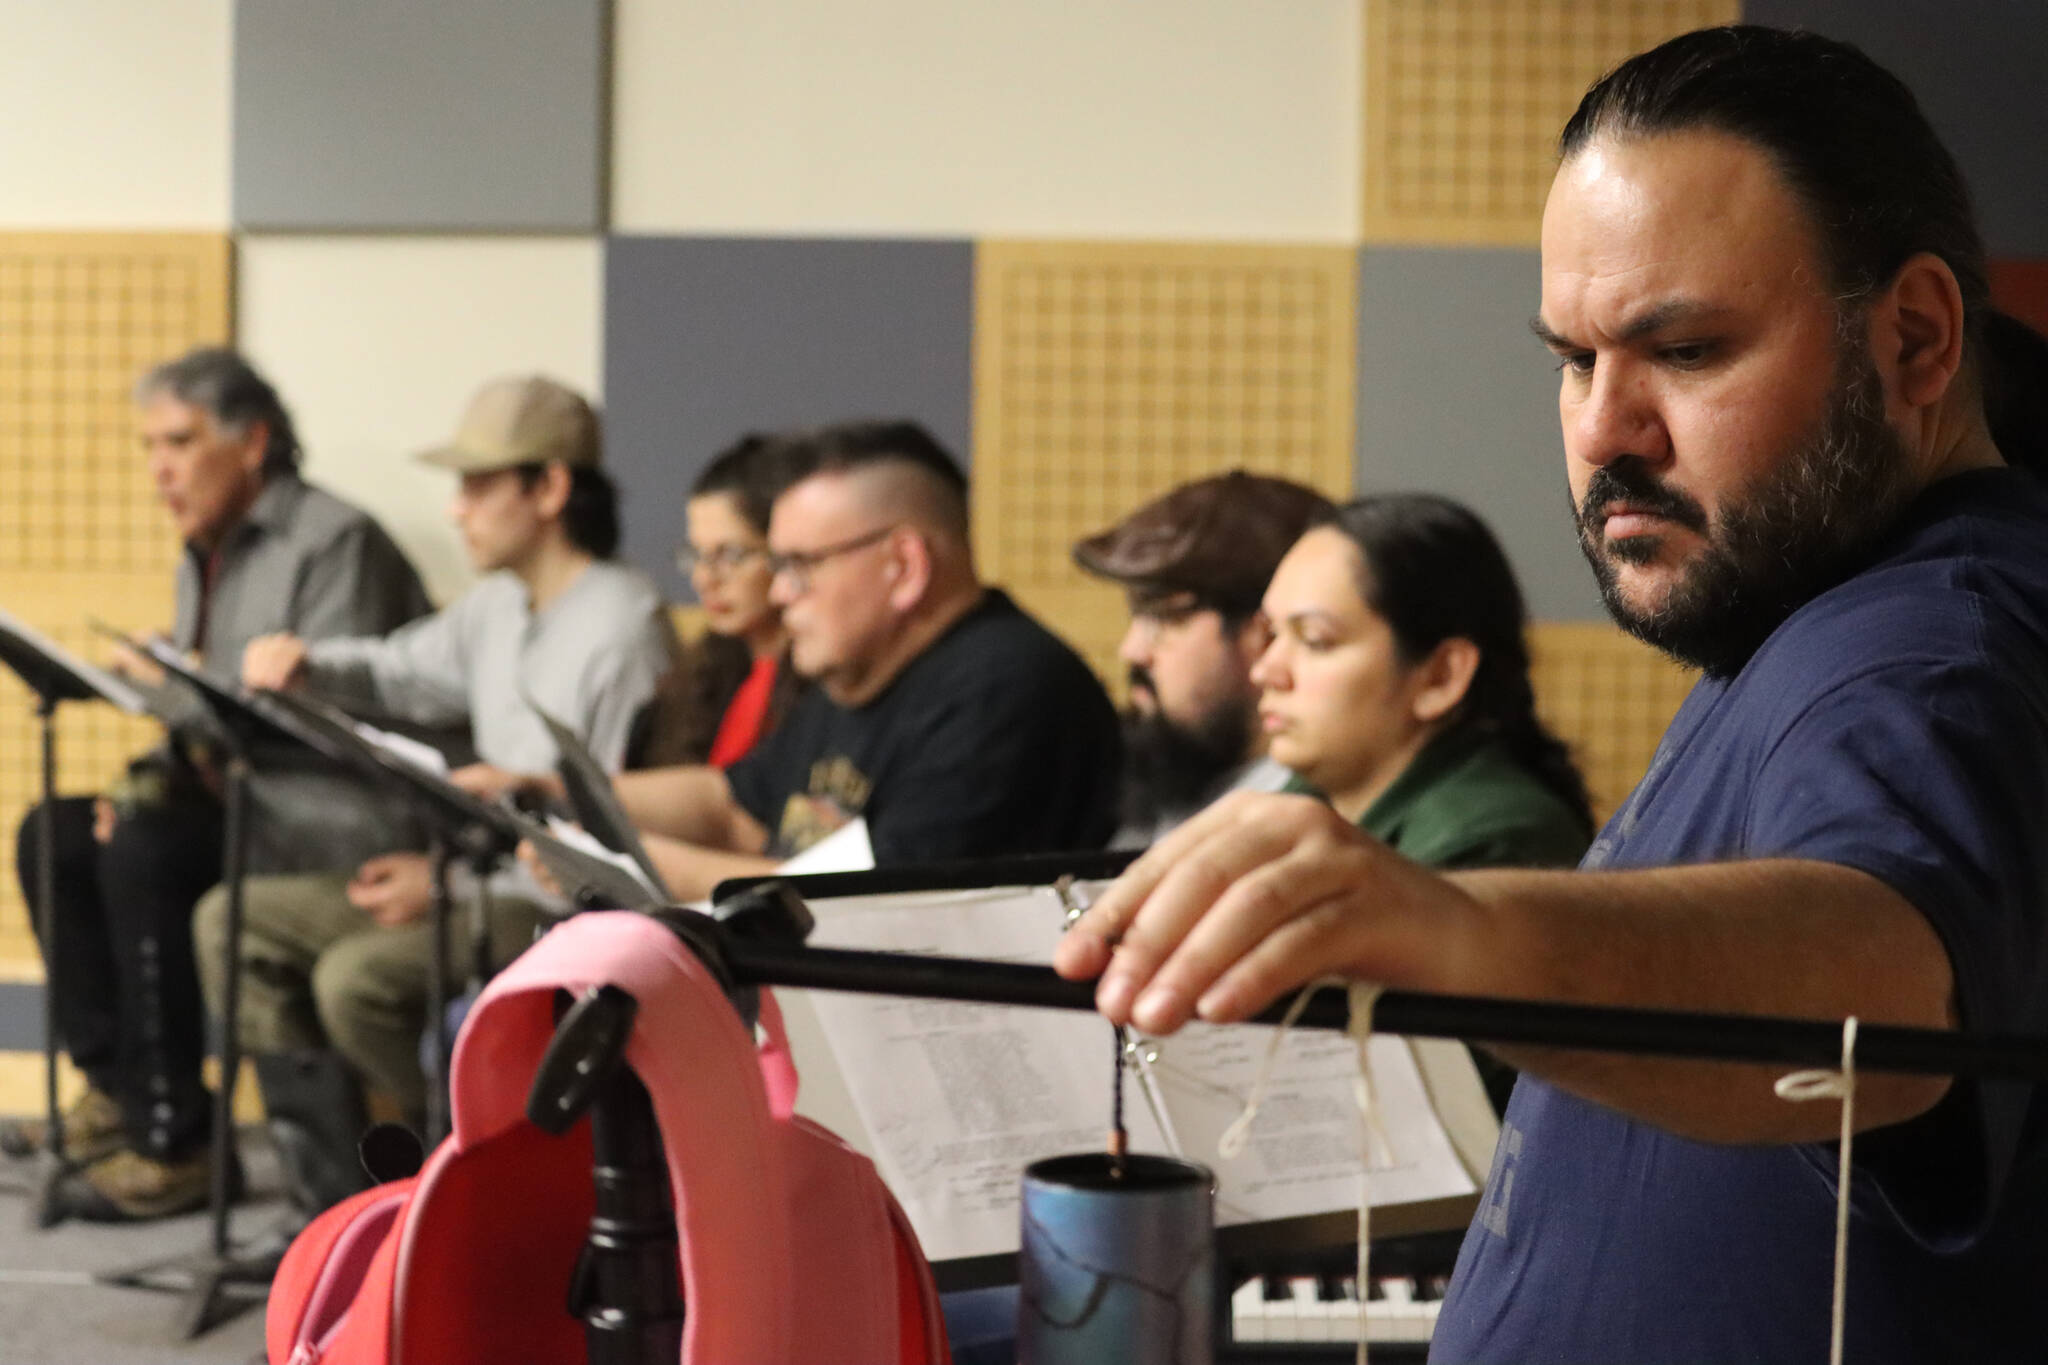 During a Wednesday rehearsal at KTOO studios for the Alaska Theater Festival: Radio Plays, Shaakindustoow Ed Littlefield, seen here, is joined by the cast of Vera Starbard’s, “The Beginning of Eagle” which is an adaptation from stories shared by DaaXKu dein Tommy Jimmie. “The Beginning of Eagle” will be performed Saturday live in-person at KTOO studios as well as on-air at KTOO News 104.3 and 91.7, and online at ktoo.org/listen. (Jonson Kuhn / Juneau Empire)